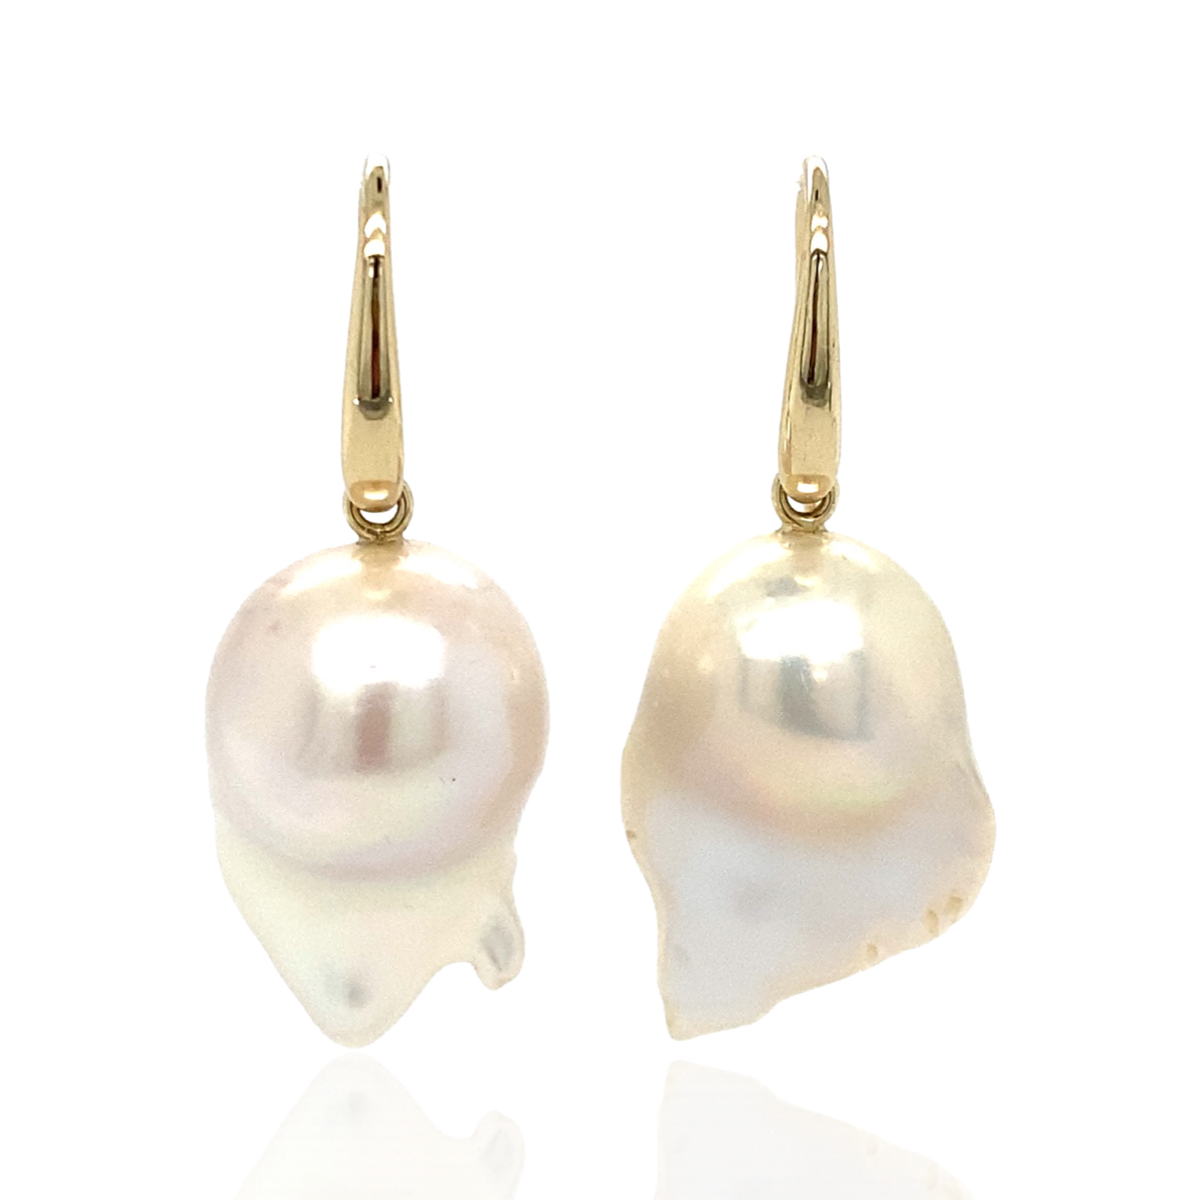 Earrings in white gold set with diamonds and baroque fresh water pearls